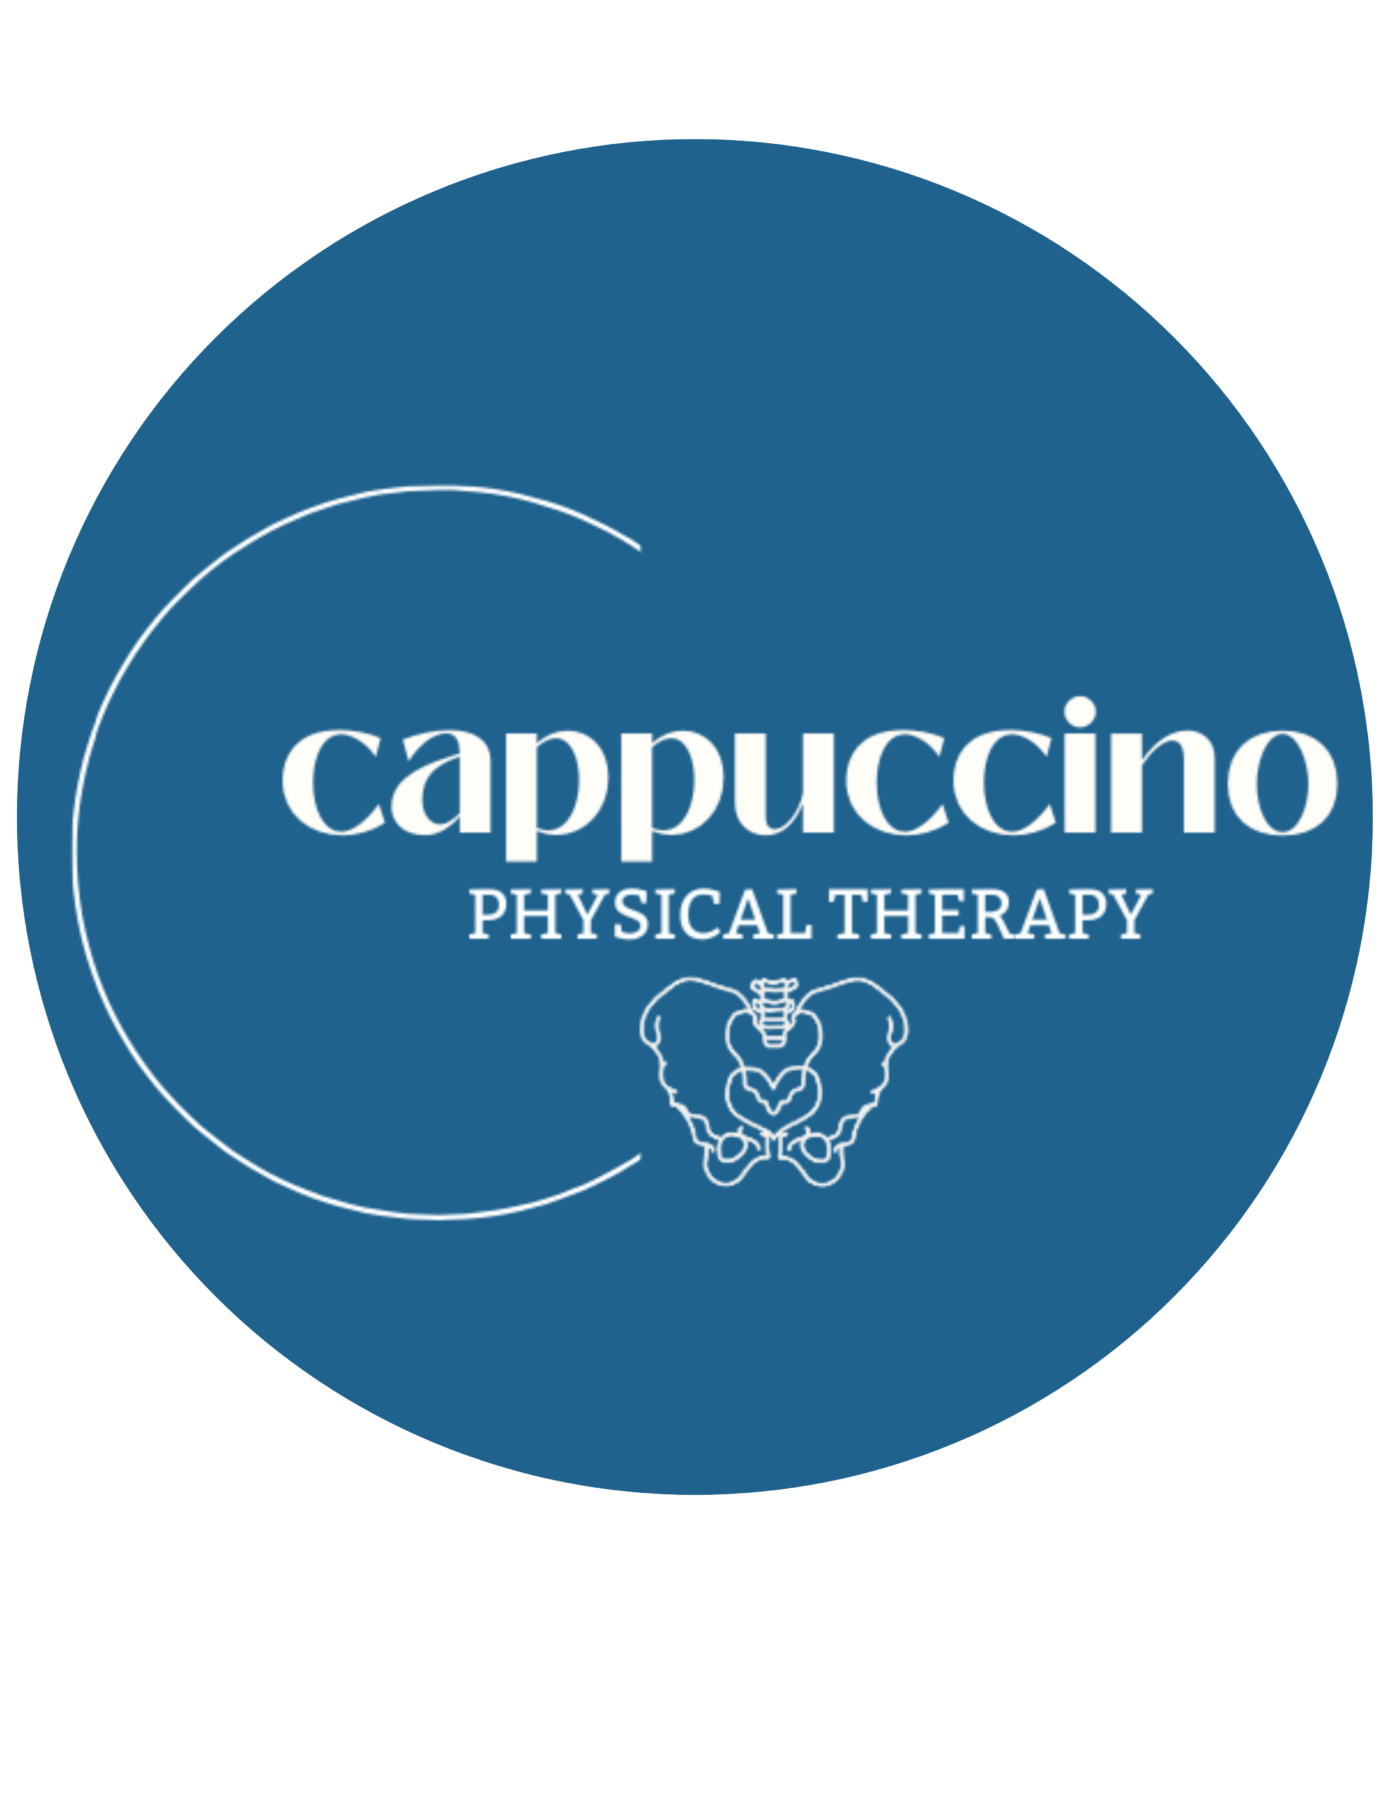 Cappuccino Physical Therapy image